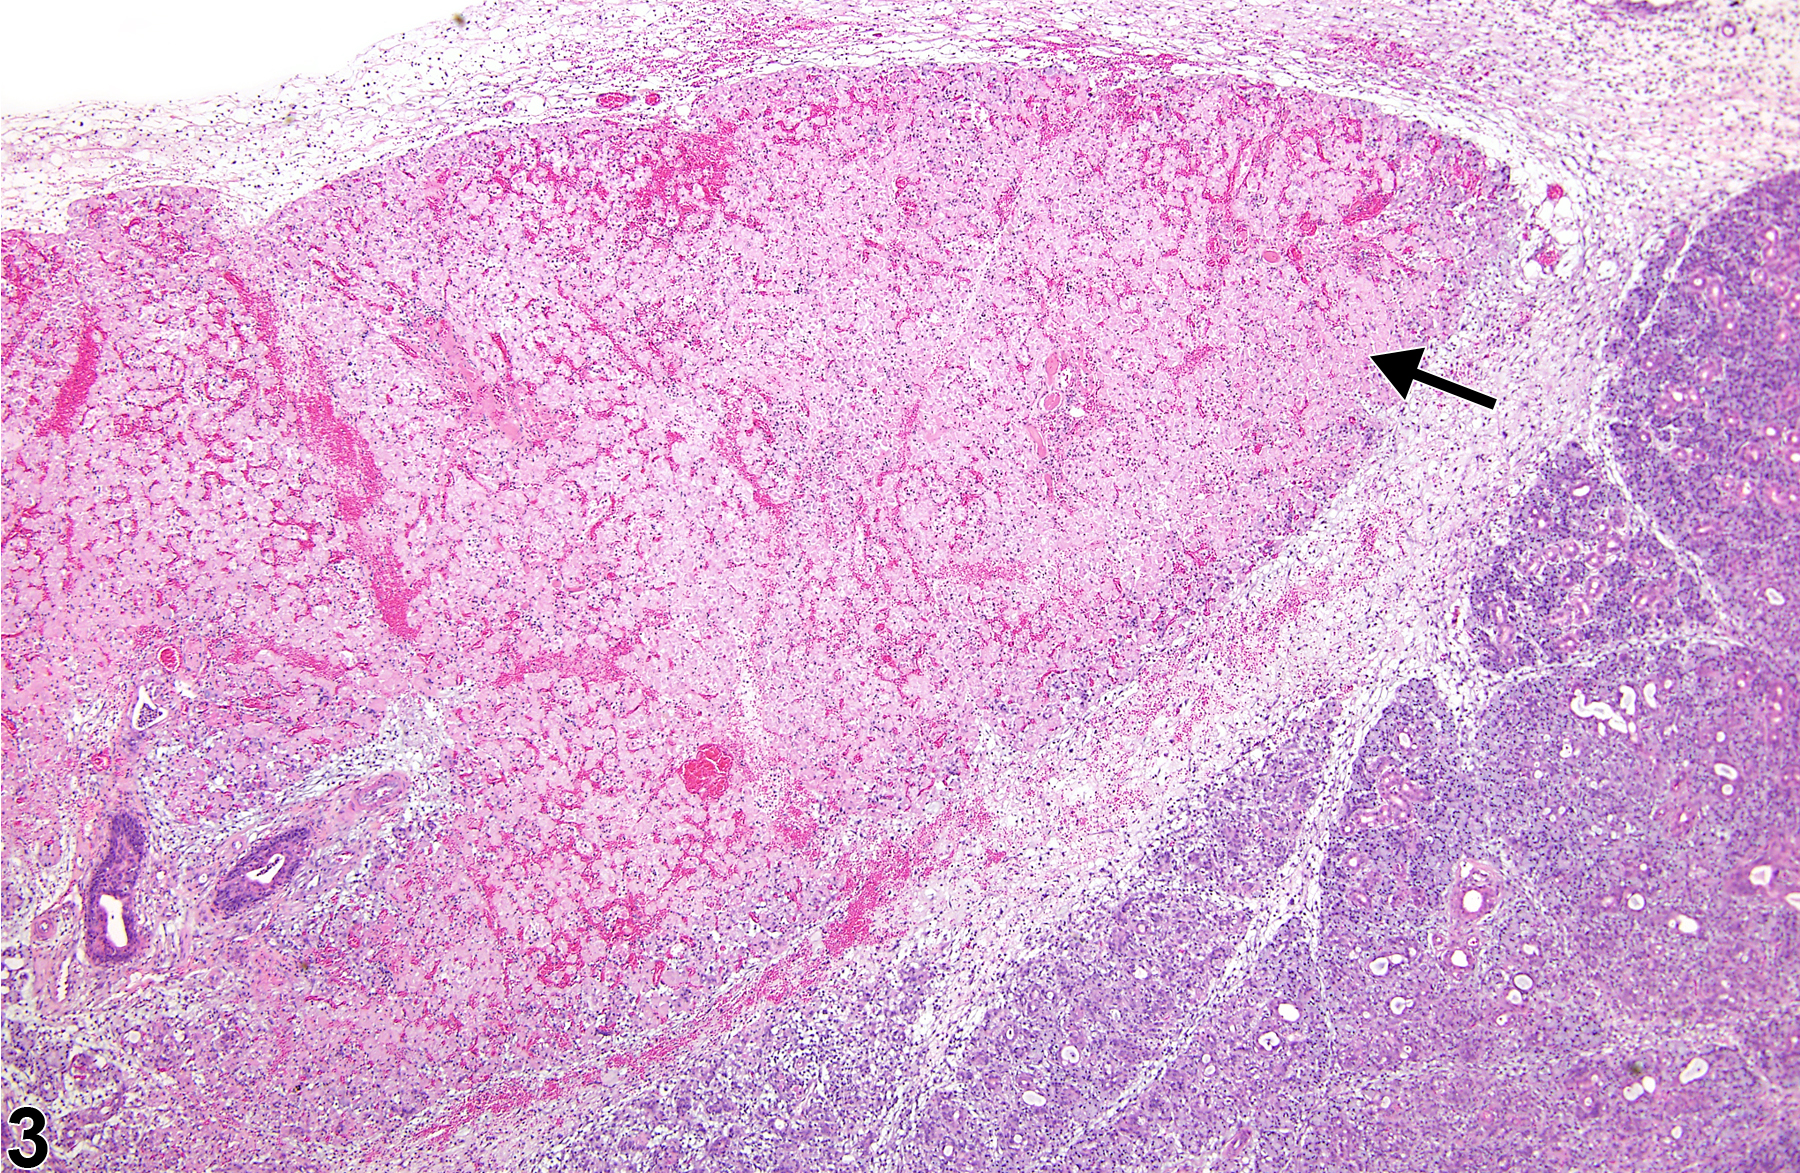 Image of necrosis in the salivary gland from a female F344/N rat in a subchronic study